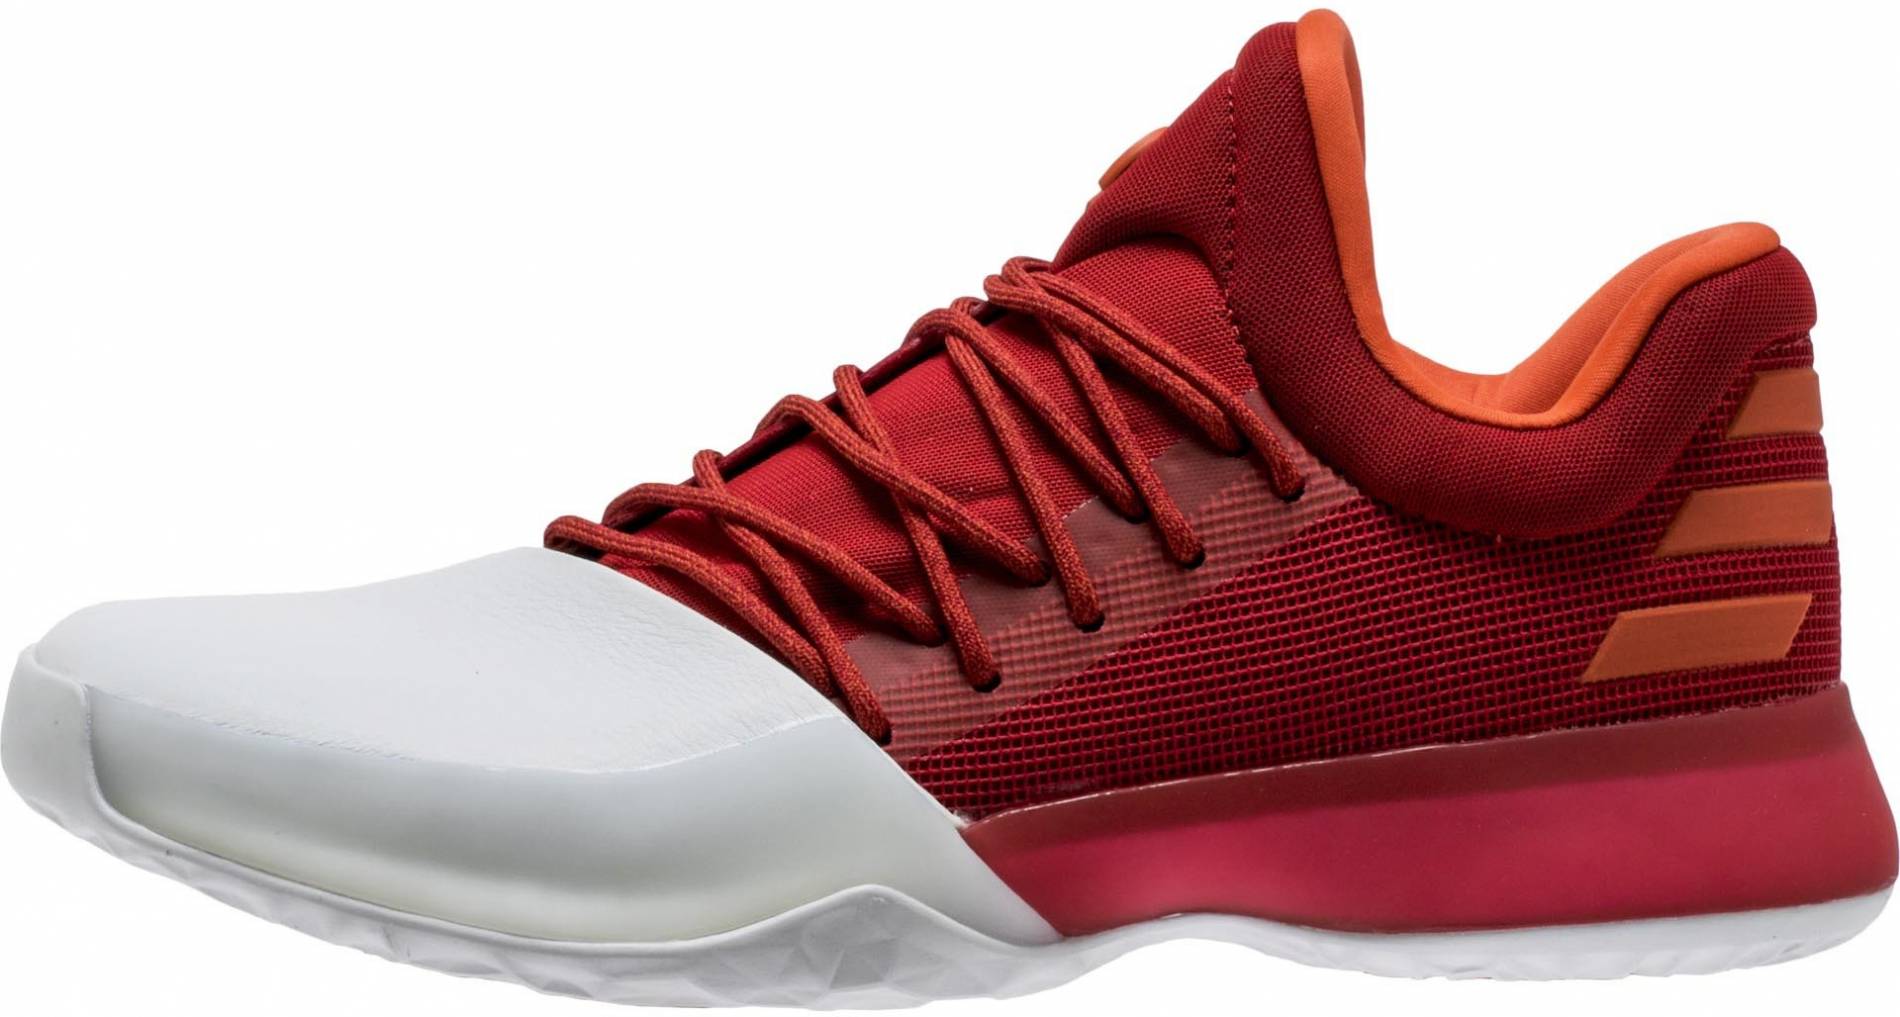 the new james harden shoes